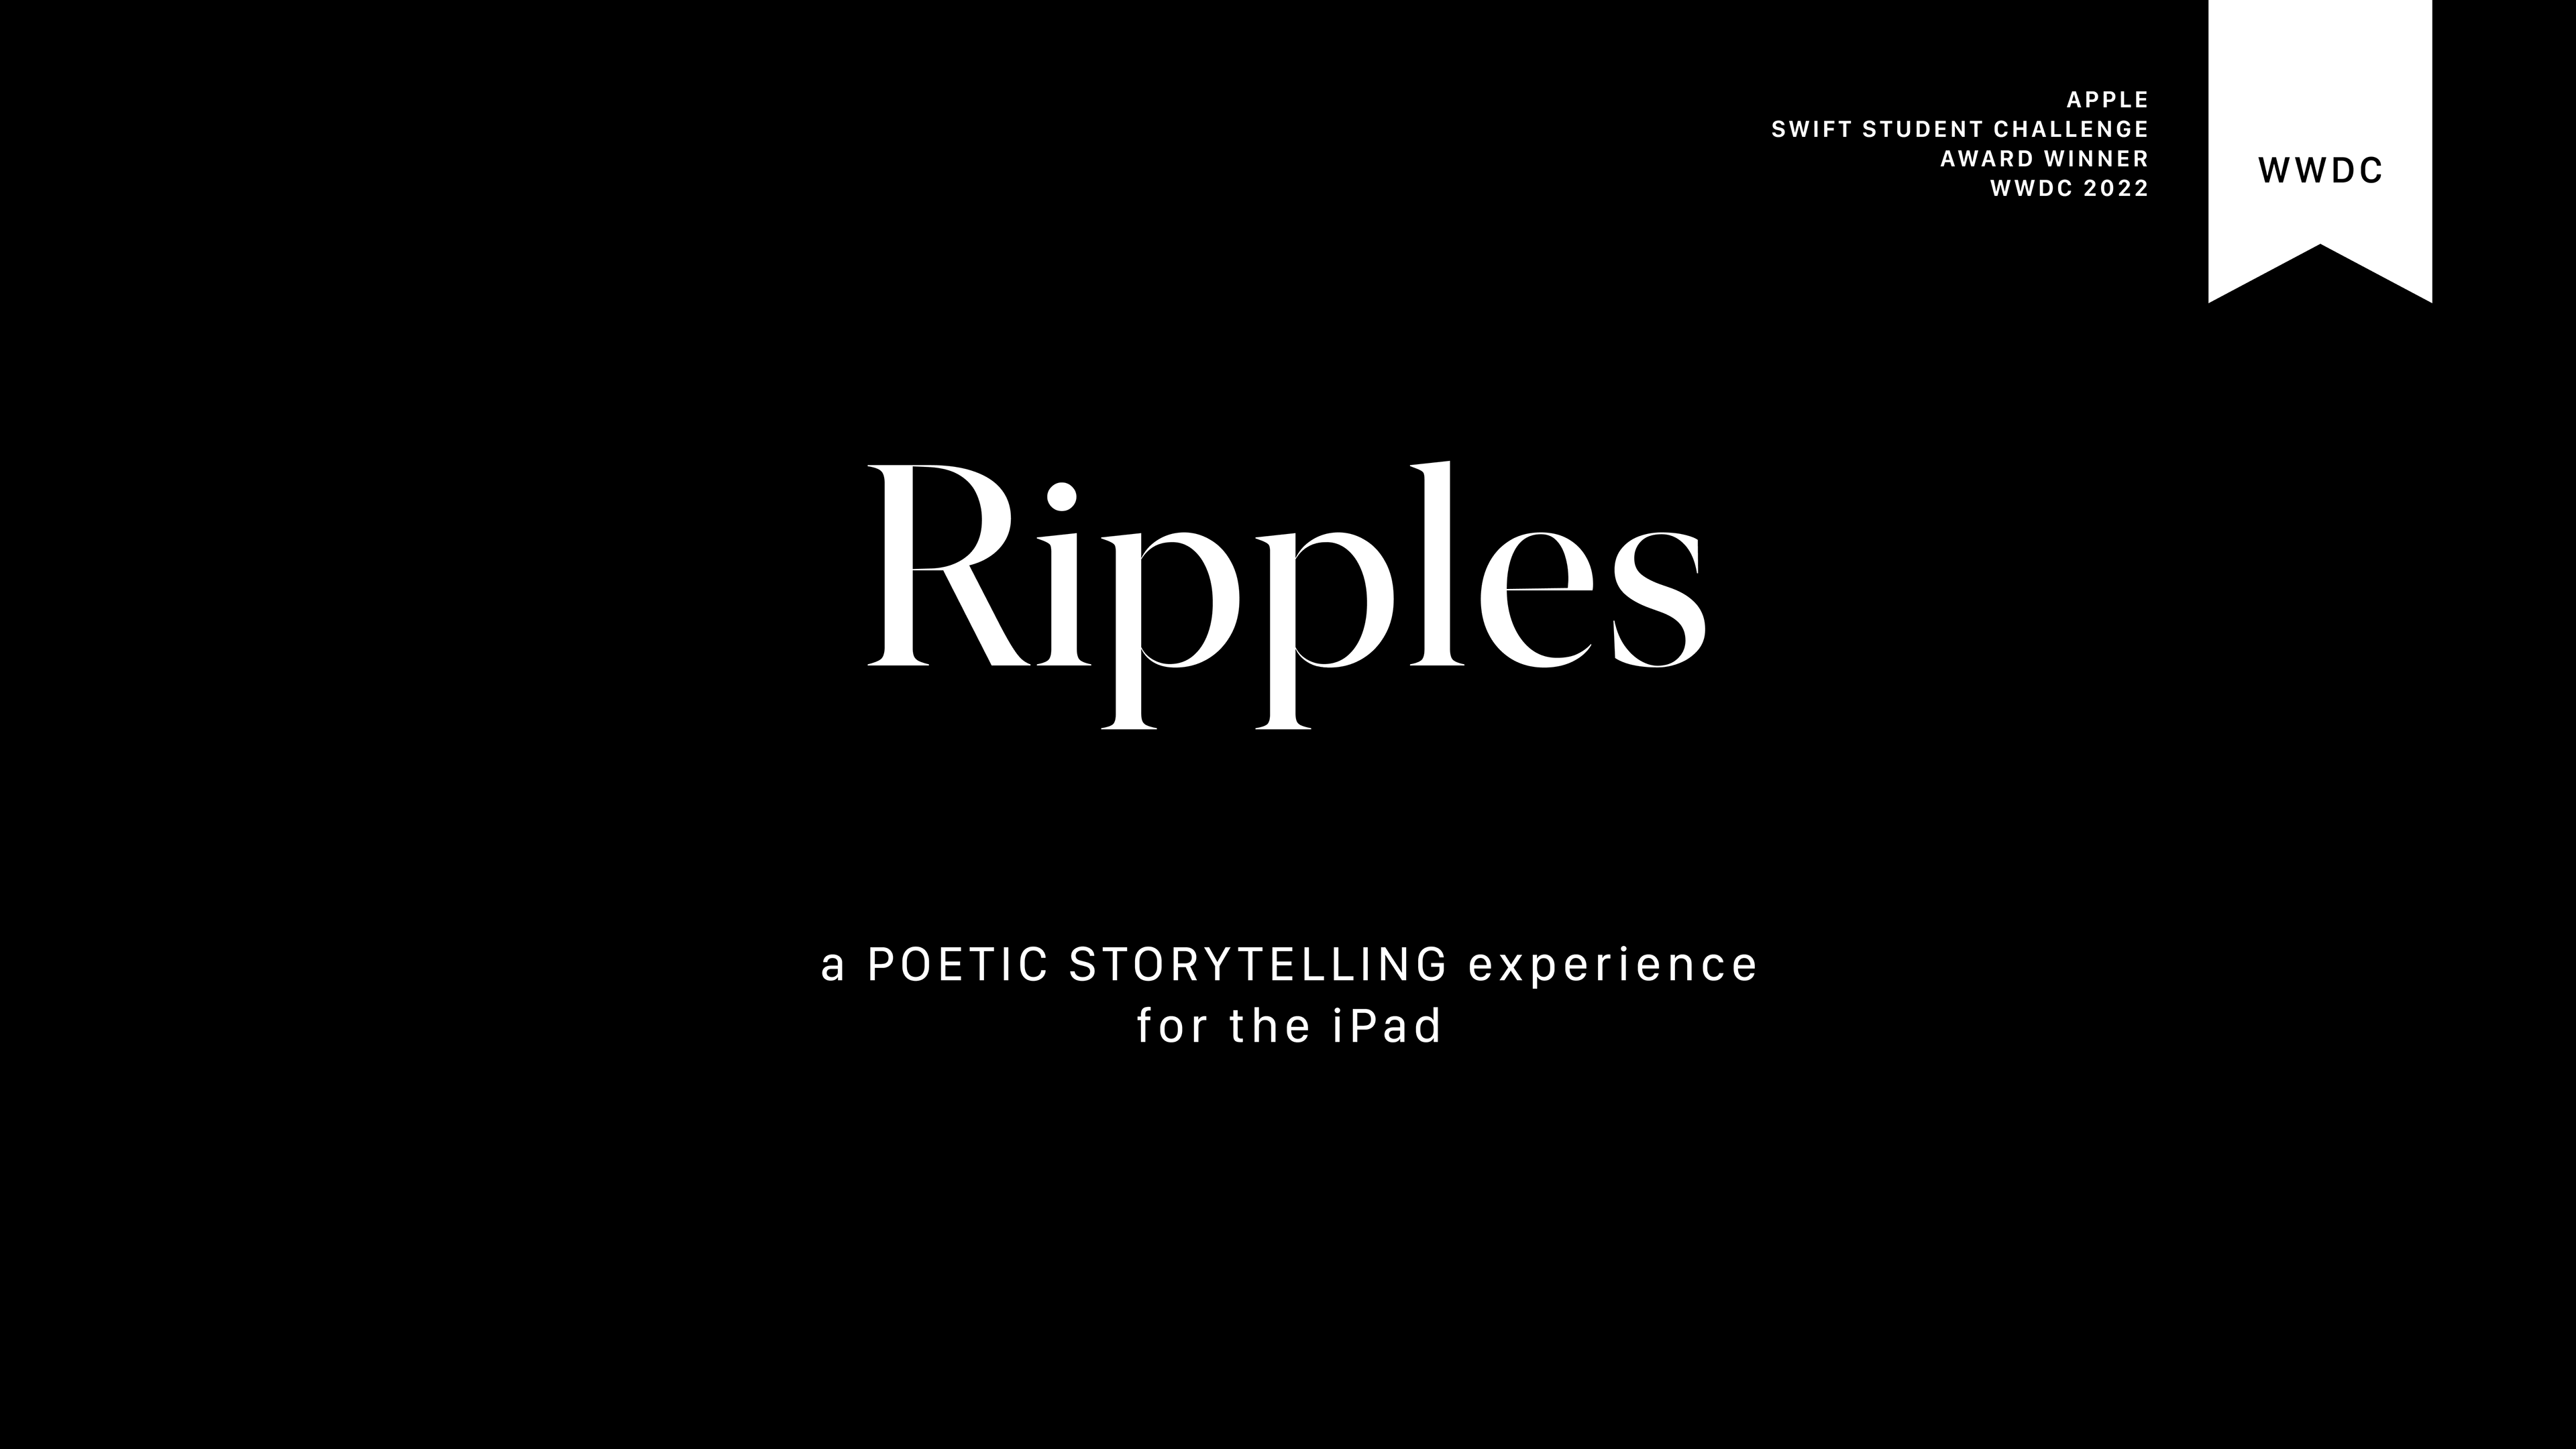 White text on black background: Ripples, a poetic storytelling experience for the iPad. Apple Swift Student Challenge award winner, WWDC 2022.